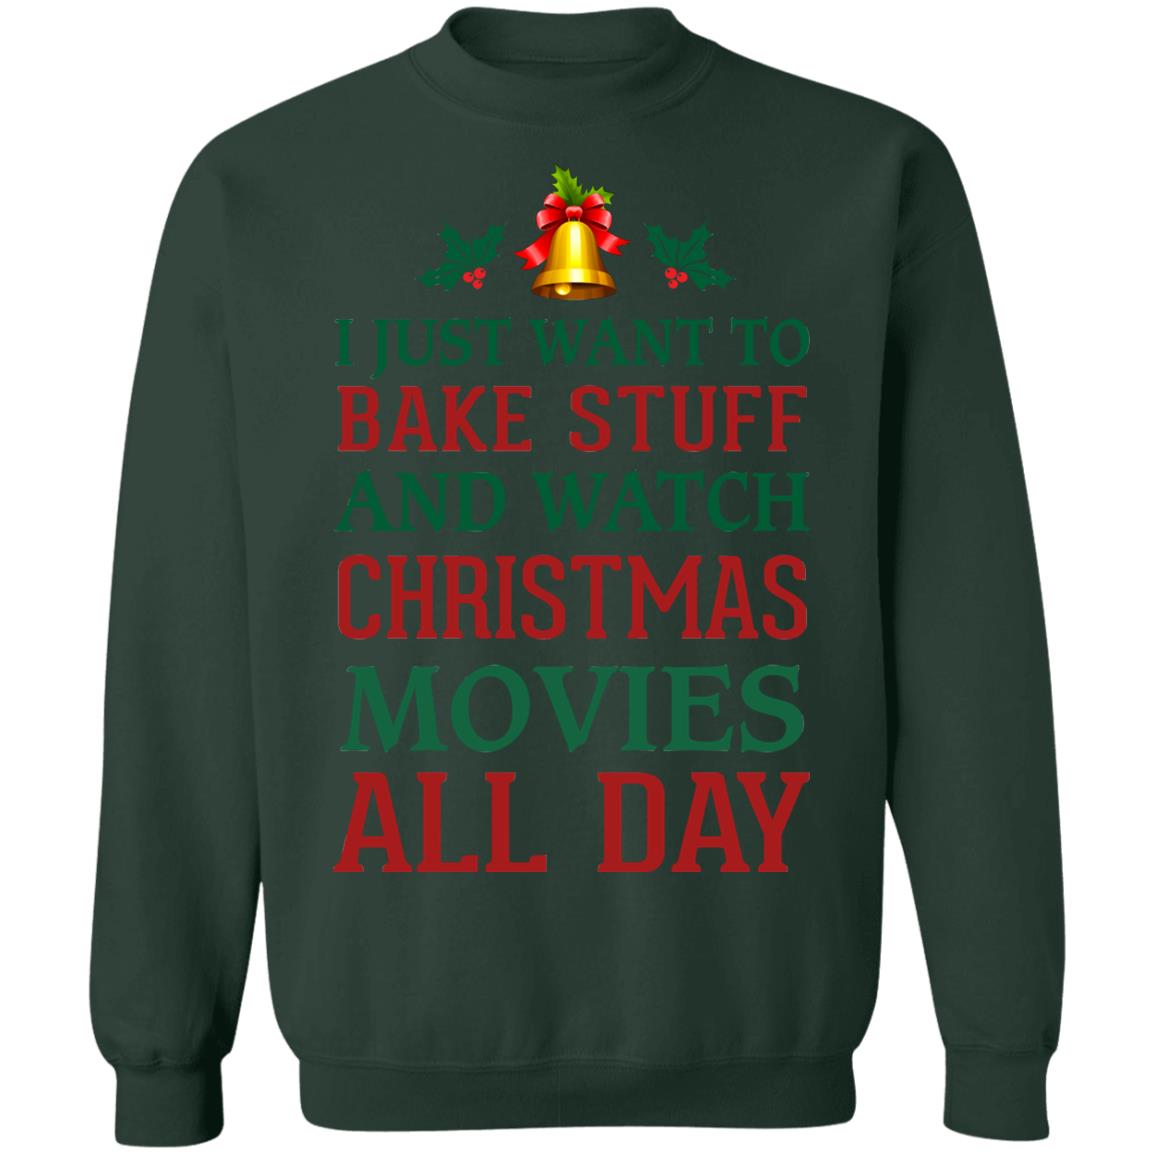 I Just Want To Bake Stuff And Watch Christmas Movies All Day Shirt